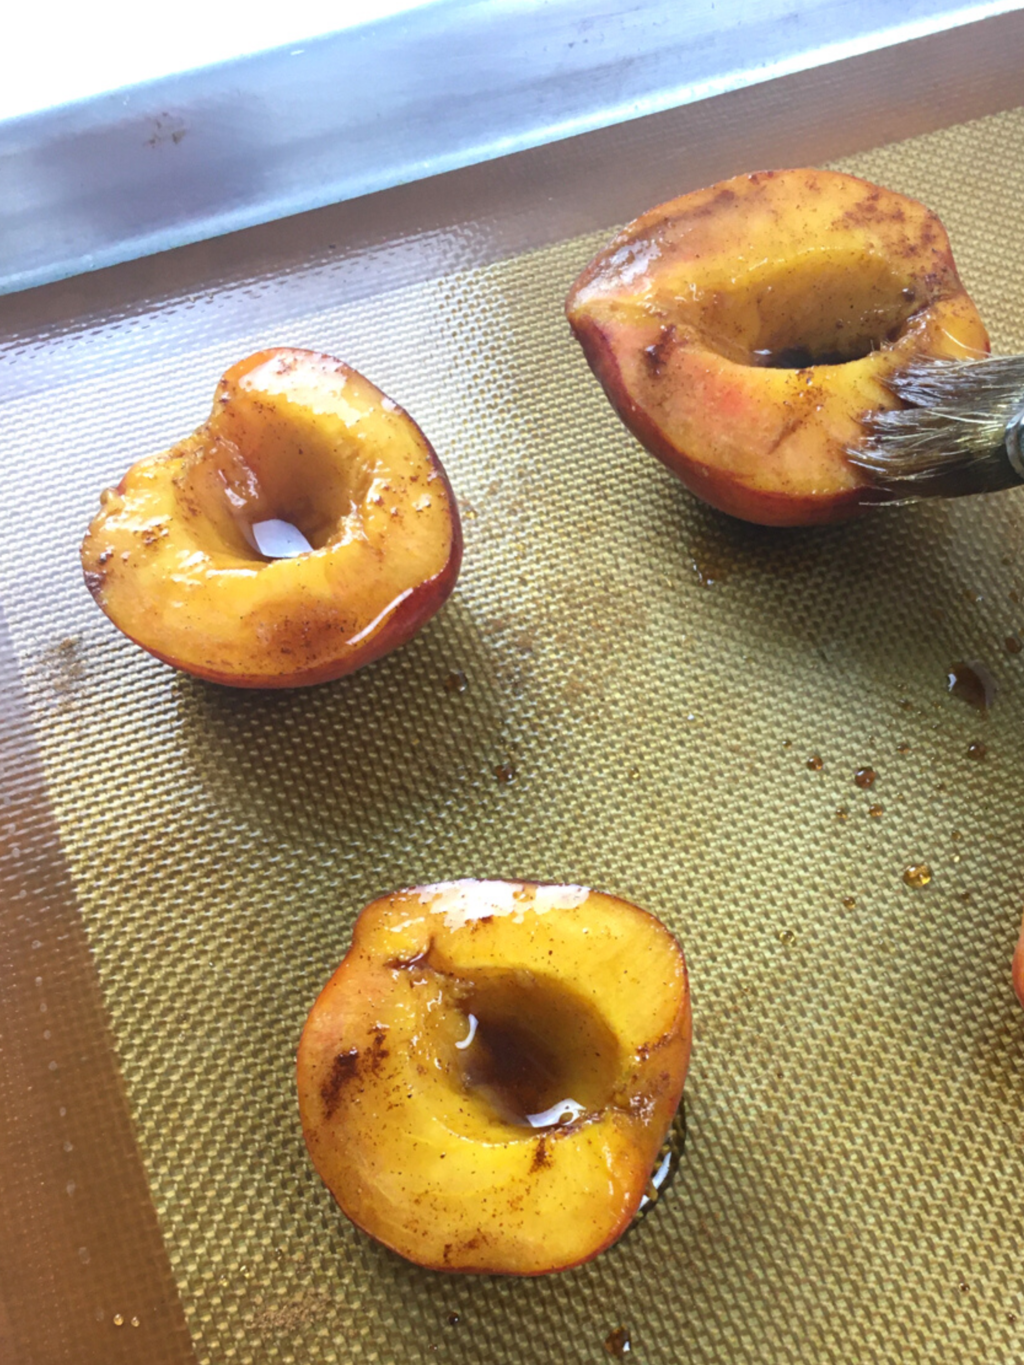 Balsamic Baked Peaches with pastry brush